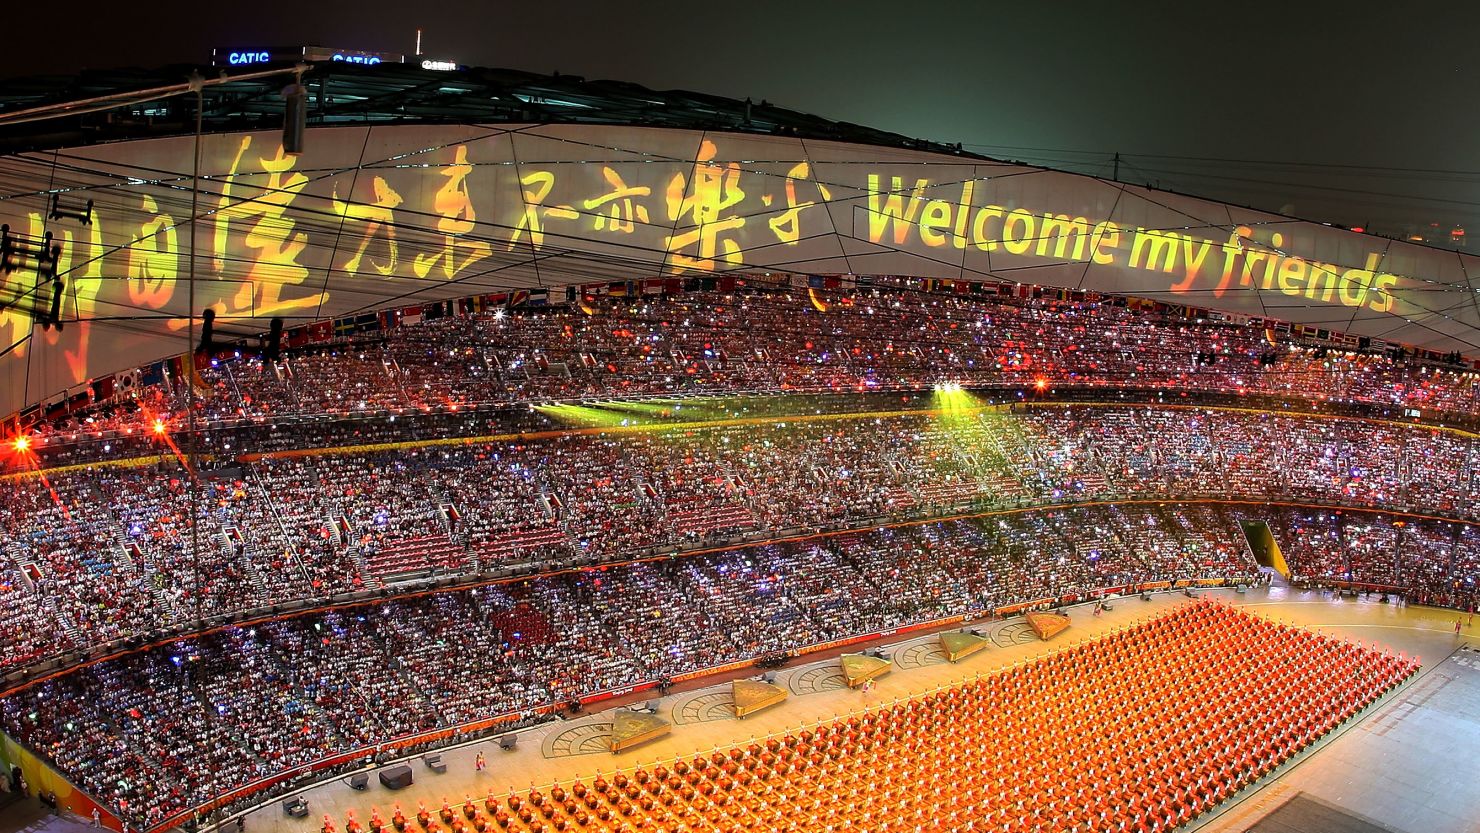 A welcome message is displayed during the Opening Ceremony for the 2008 Beijing Summer Olympics.